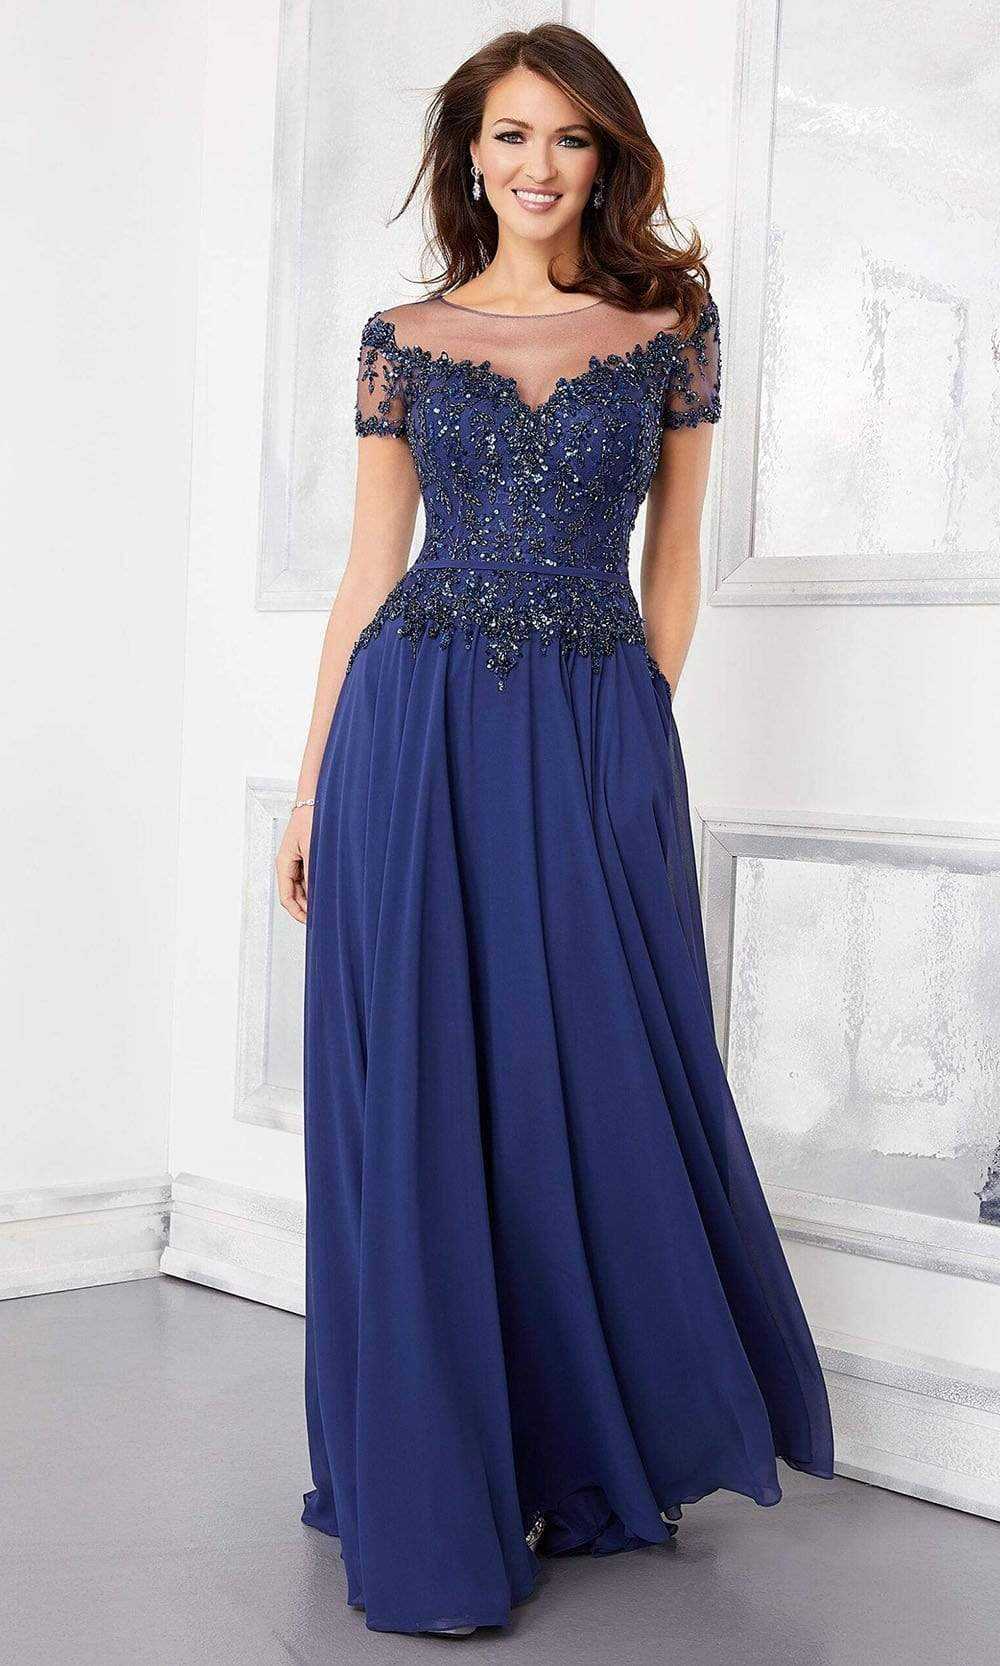 MGNY by Mori Lee, Mori Lee - 72309 Illusion Neckline Crystal Beaded Chiffon A-Line Gown